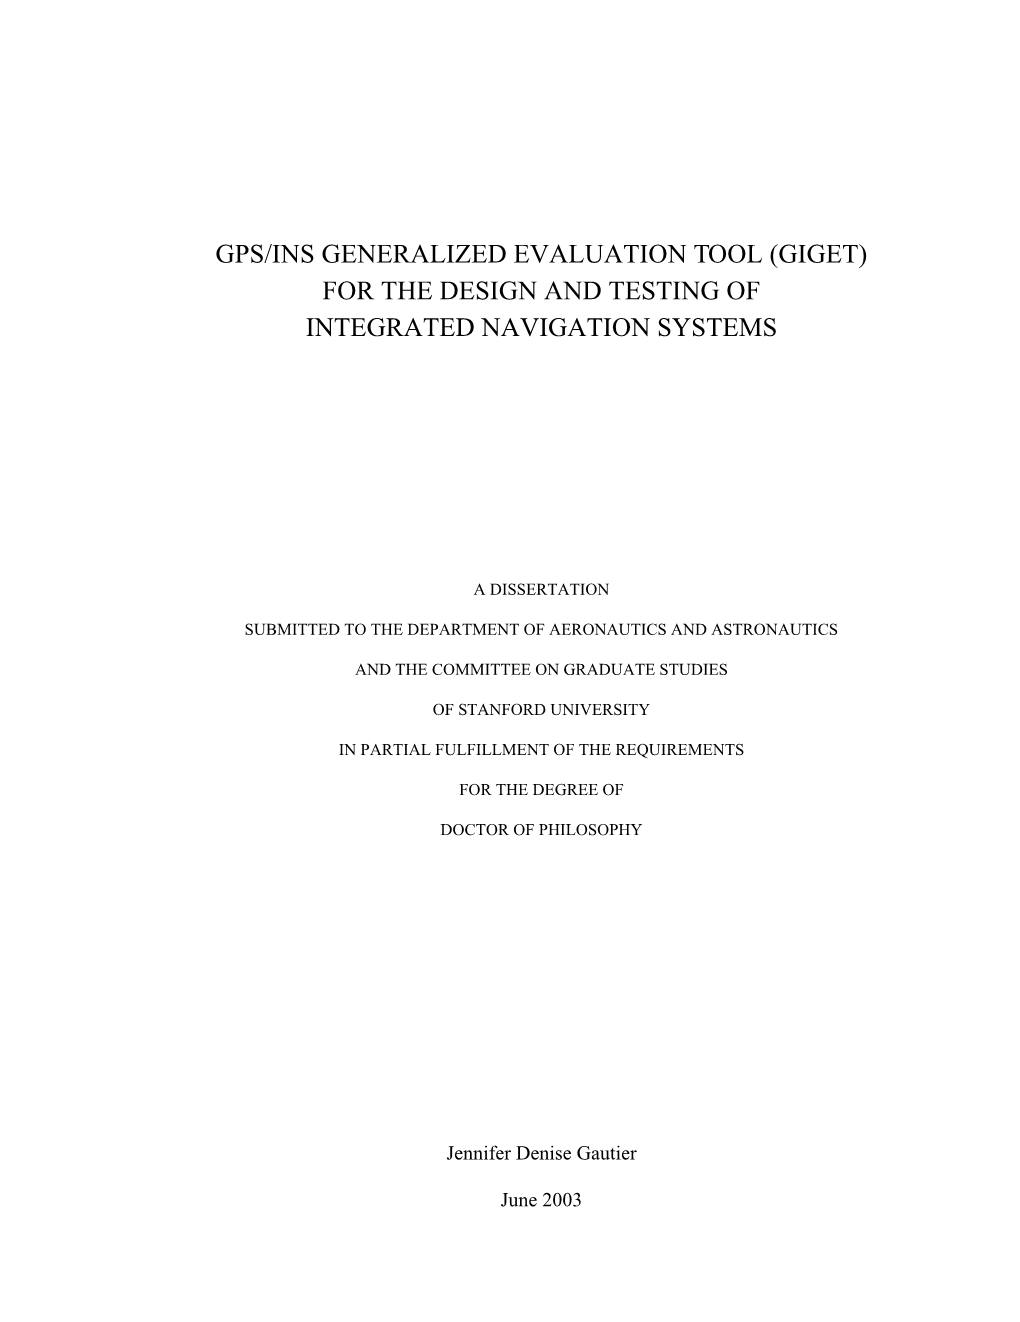 Gps/Ins Generalized Evaluation Tool (Giget) for the Design and Testing of Integrated Navigation Systems